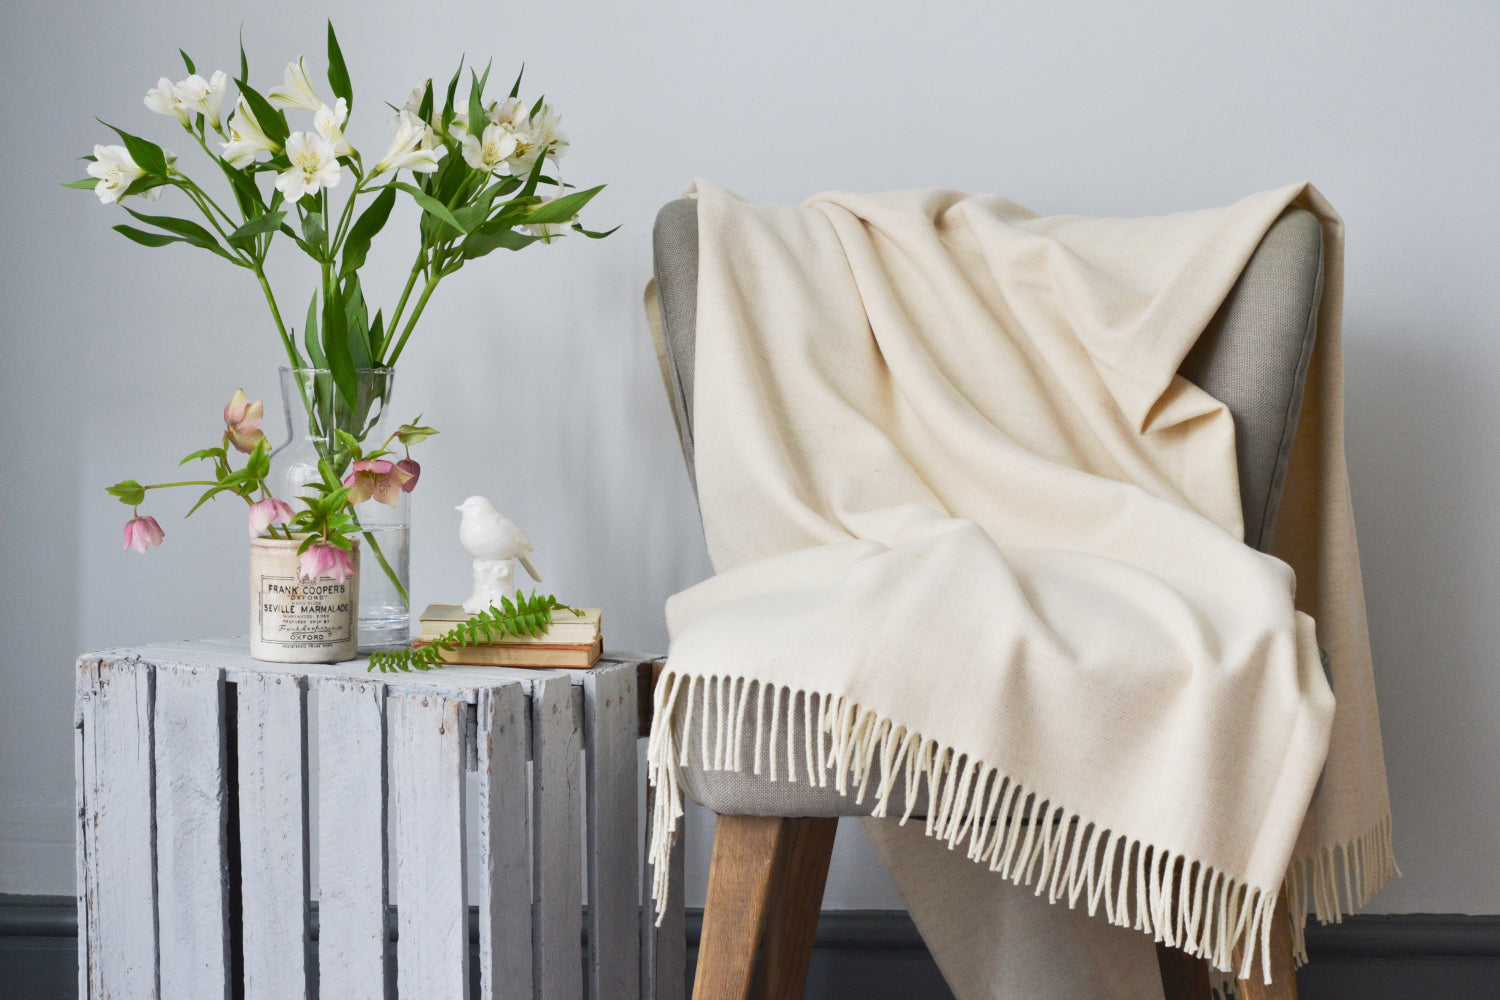 An XL wool blanket from The British Blanket Company is spread out across a beautiful chair 